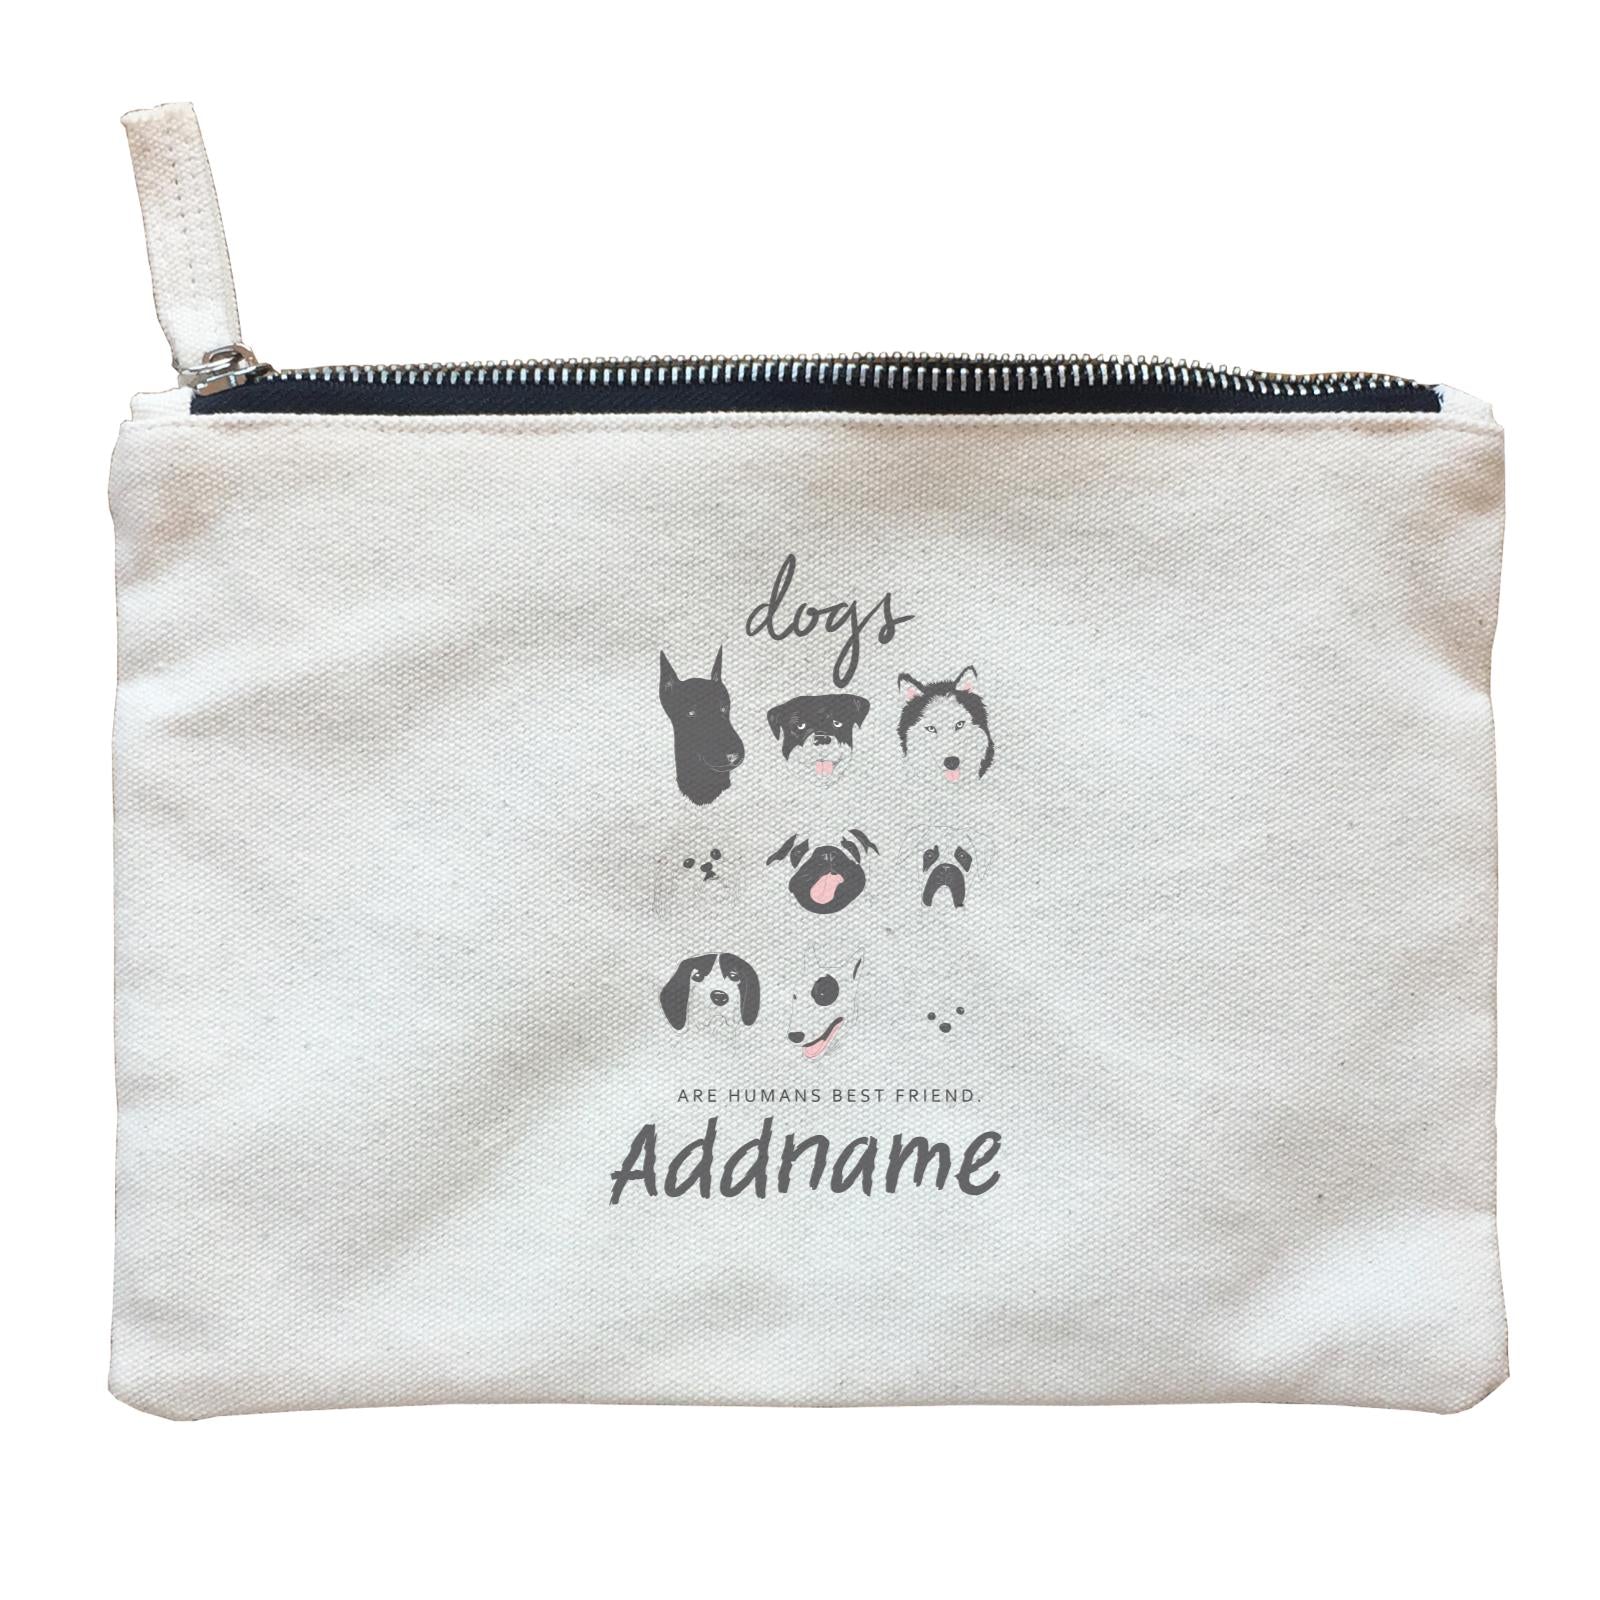 Funny Hand Drawn Animals Dogs Are Human Best Friends With Addname Zipper Pouch